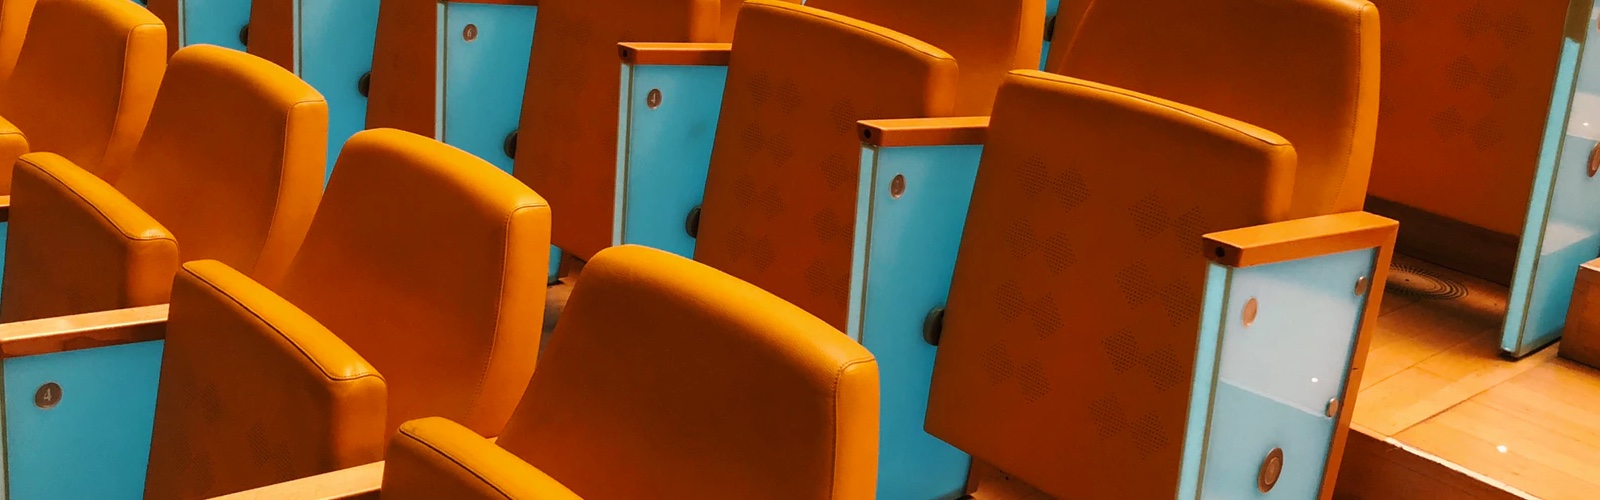 rows of empty, orange padded auditorium seats with teal accent panels on the arm rests